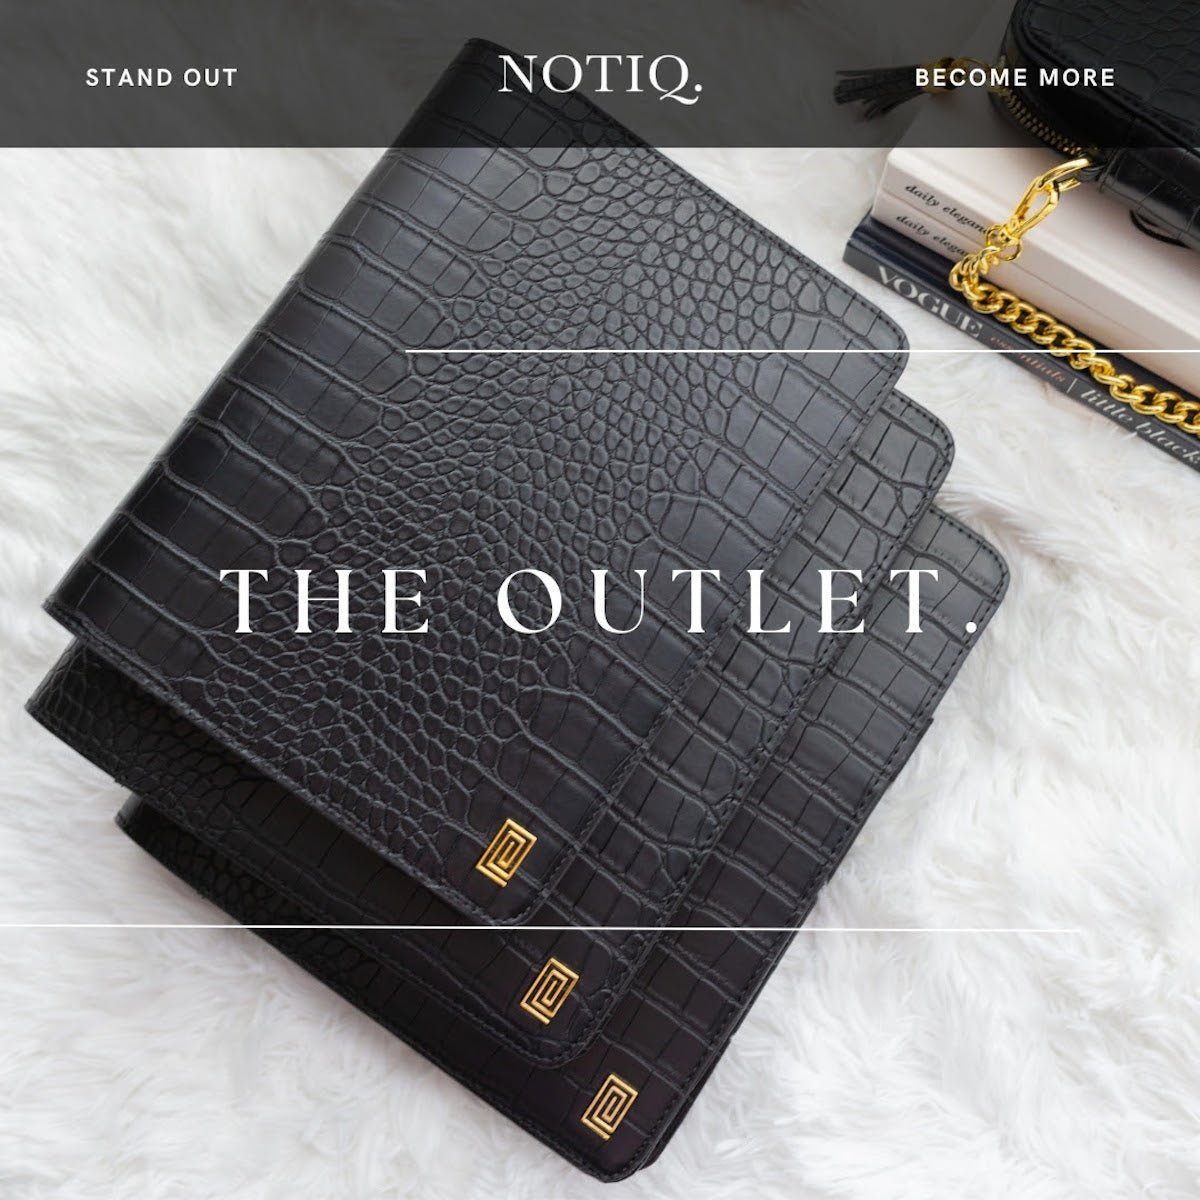 New Online NOTIQ Outlet Makes Buying Luxury Pieces More Accessible - NOTIQ